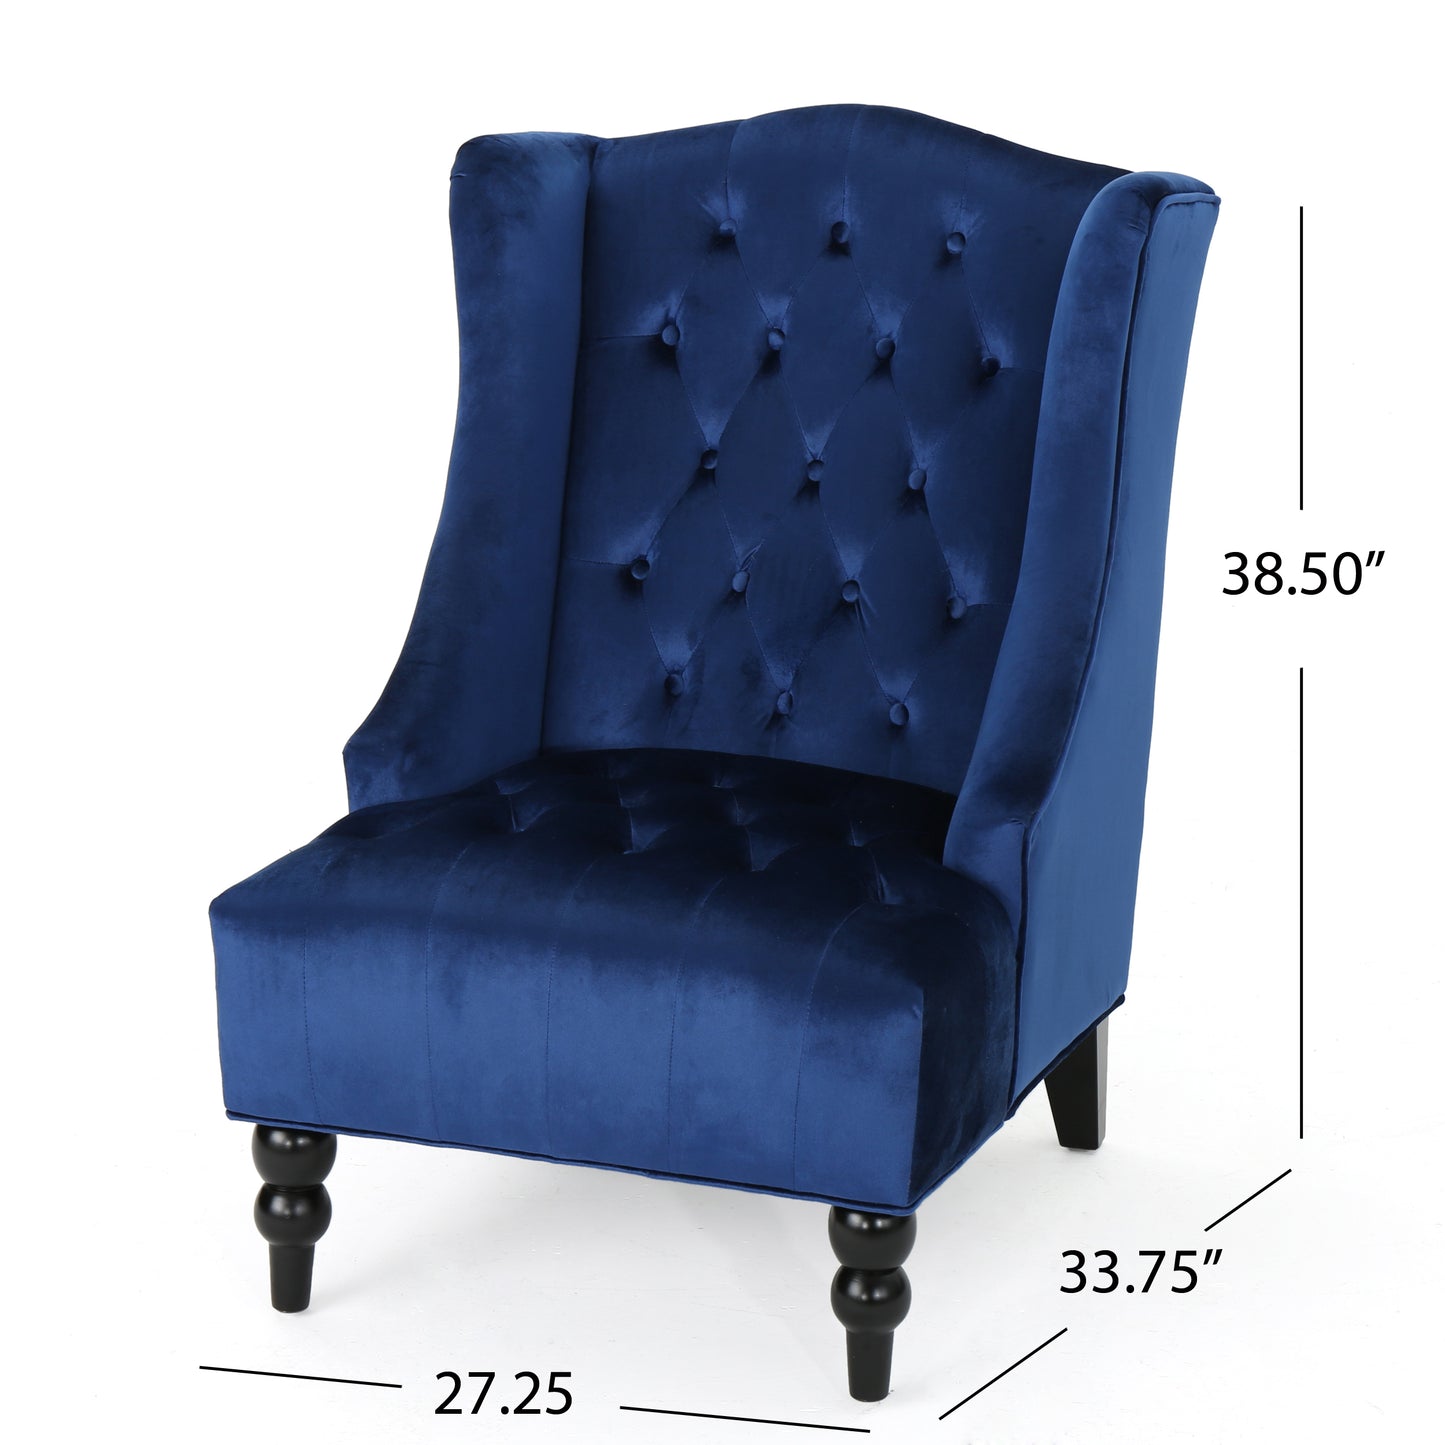 Talisa Winged High-Back Tufted New Velvet Club Chair